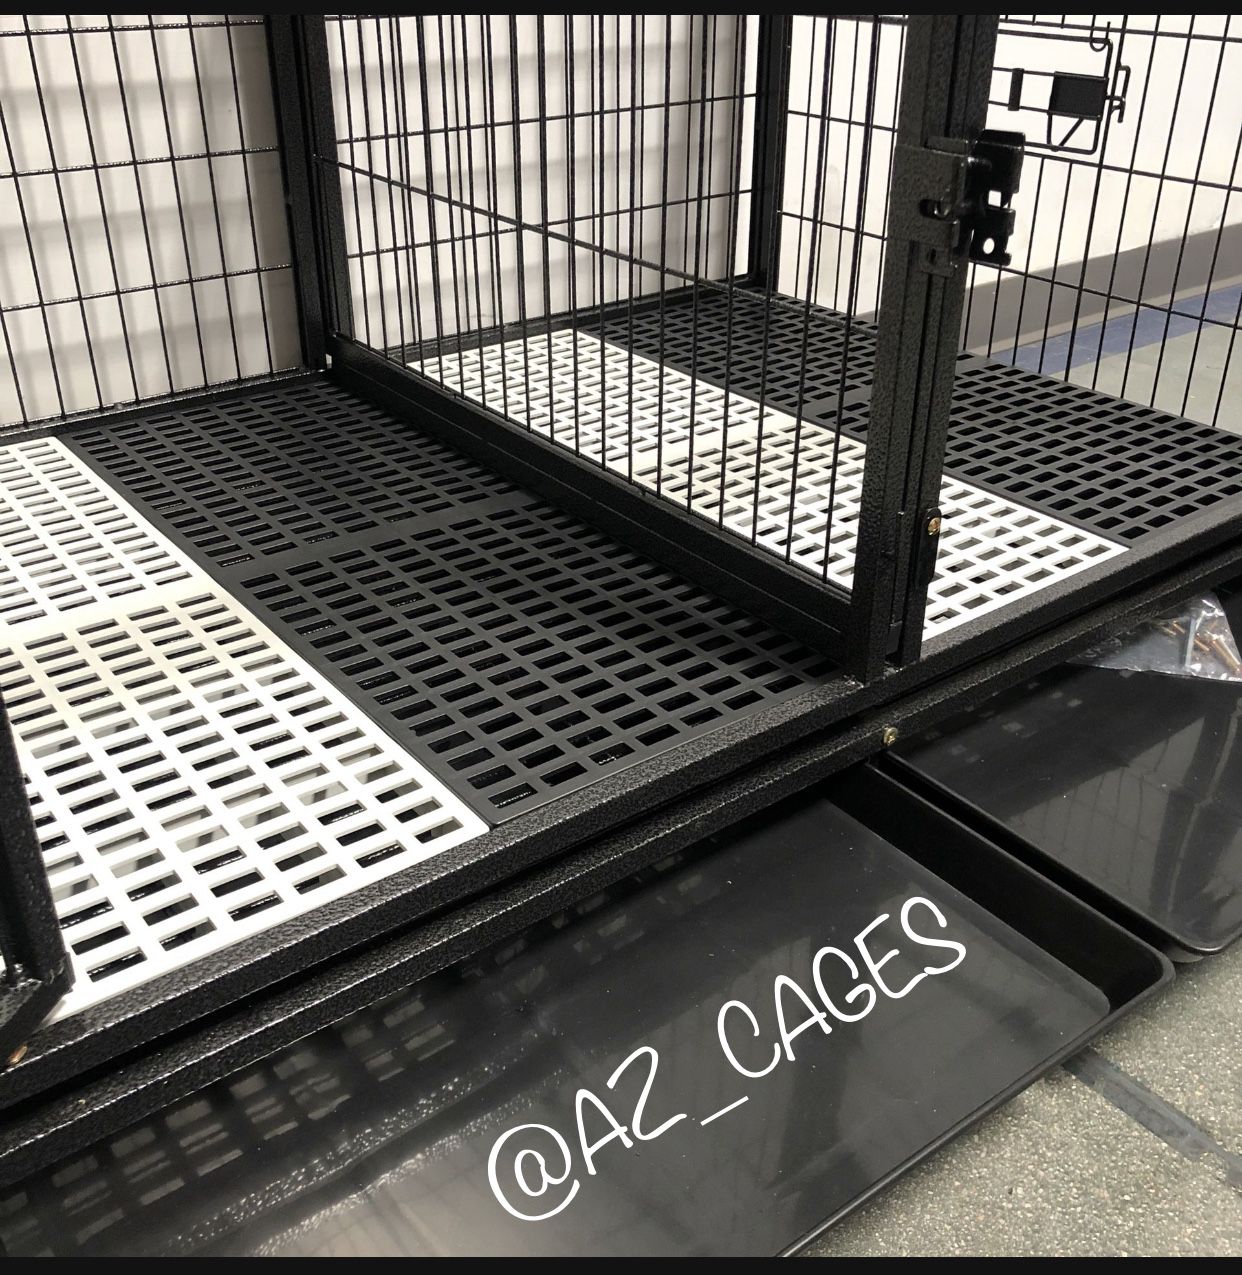 Brand New 42” Heavy Duty Dog Pet Double door Kennel Crate Cage 🐕‍🦺🐩🐶  with Comfy Plastic Floor 🐾💟 please see dimensions in second picture 🇺🇸 